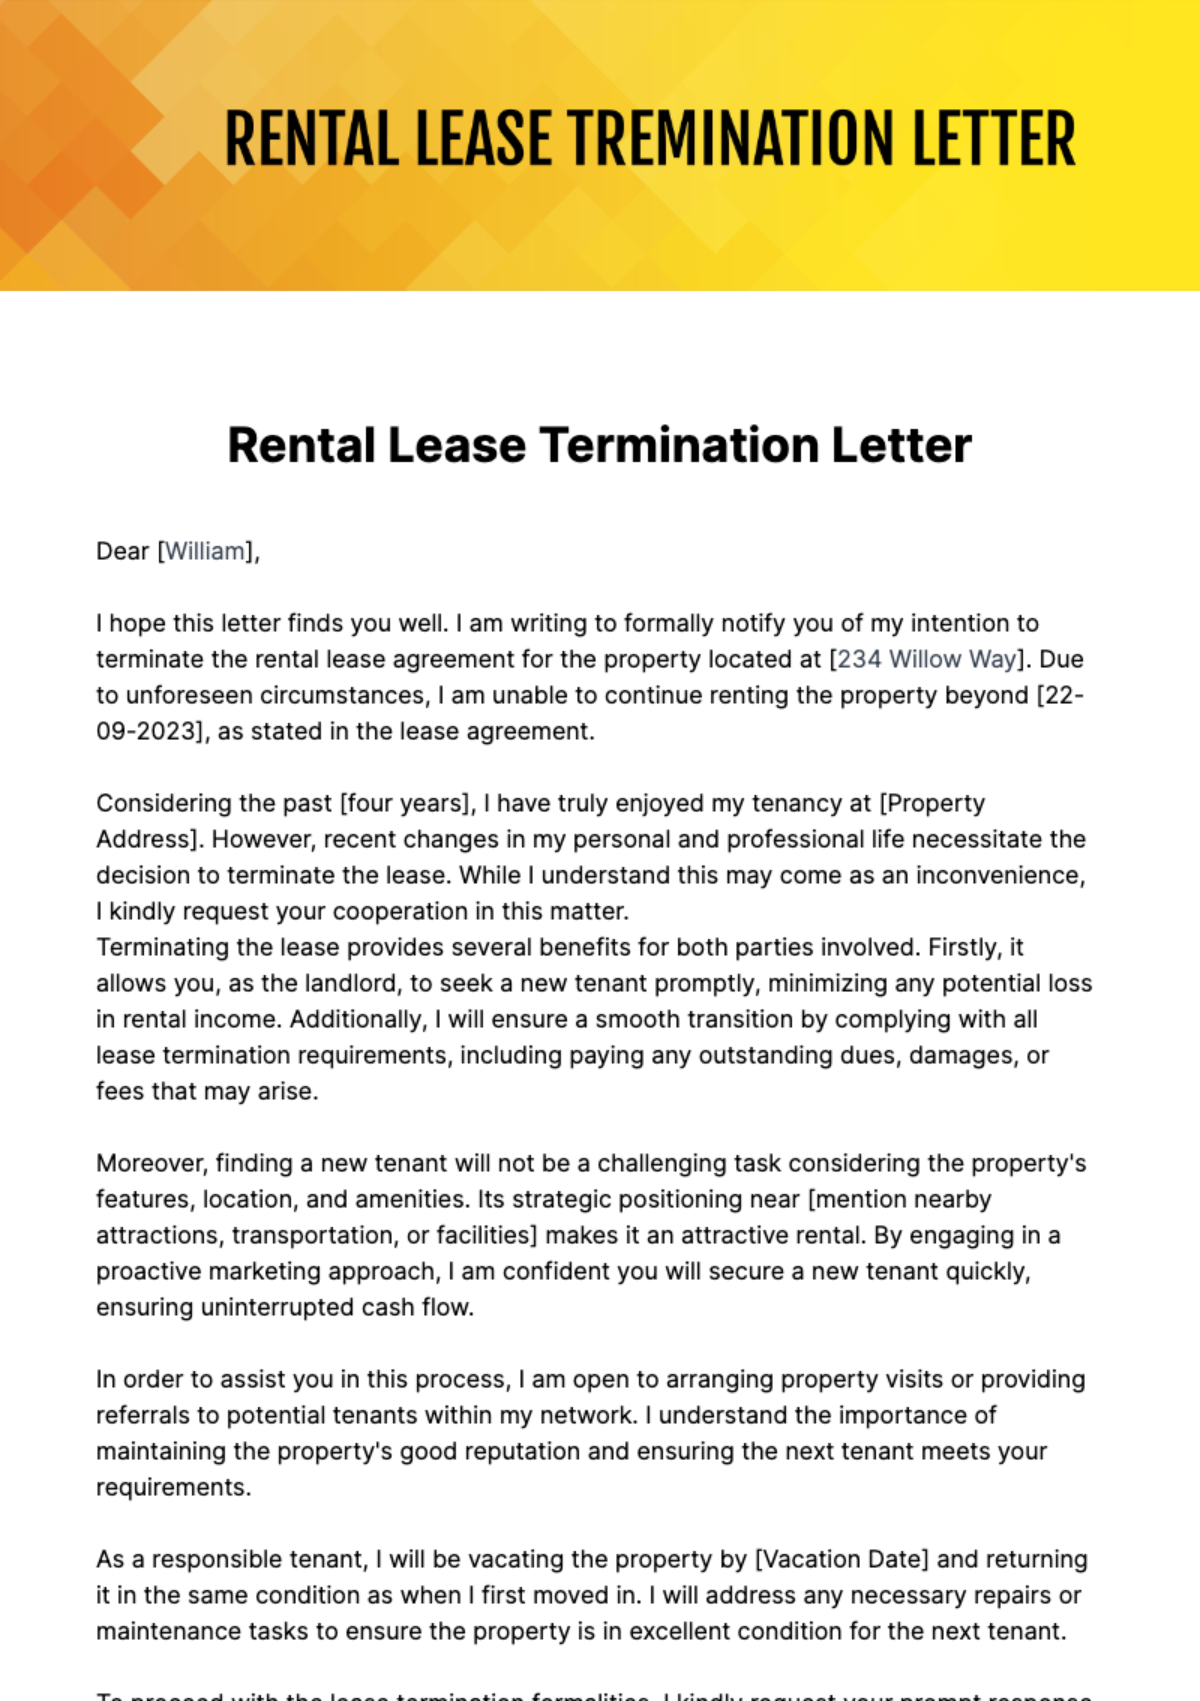 Free Rental Lease Termination Letter Template